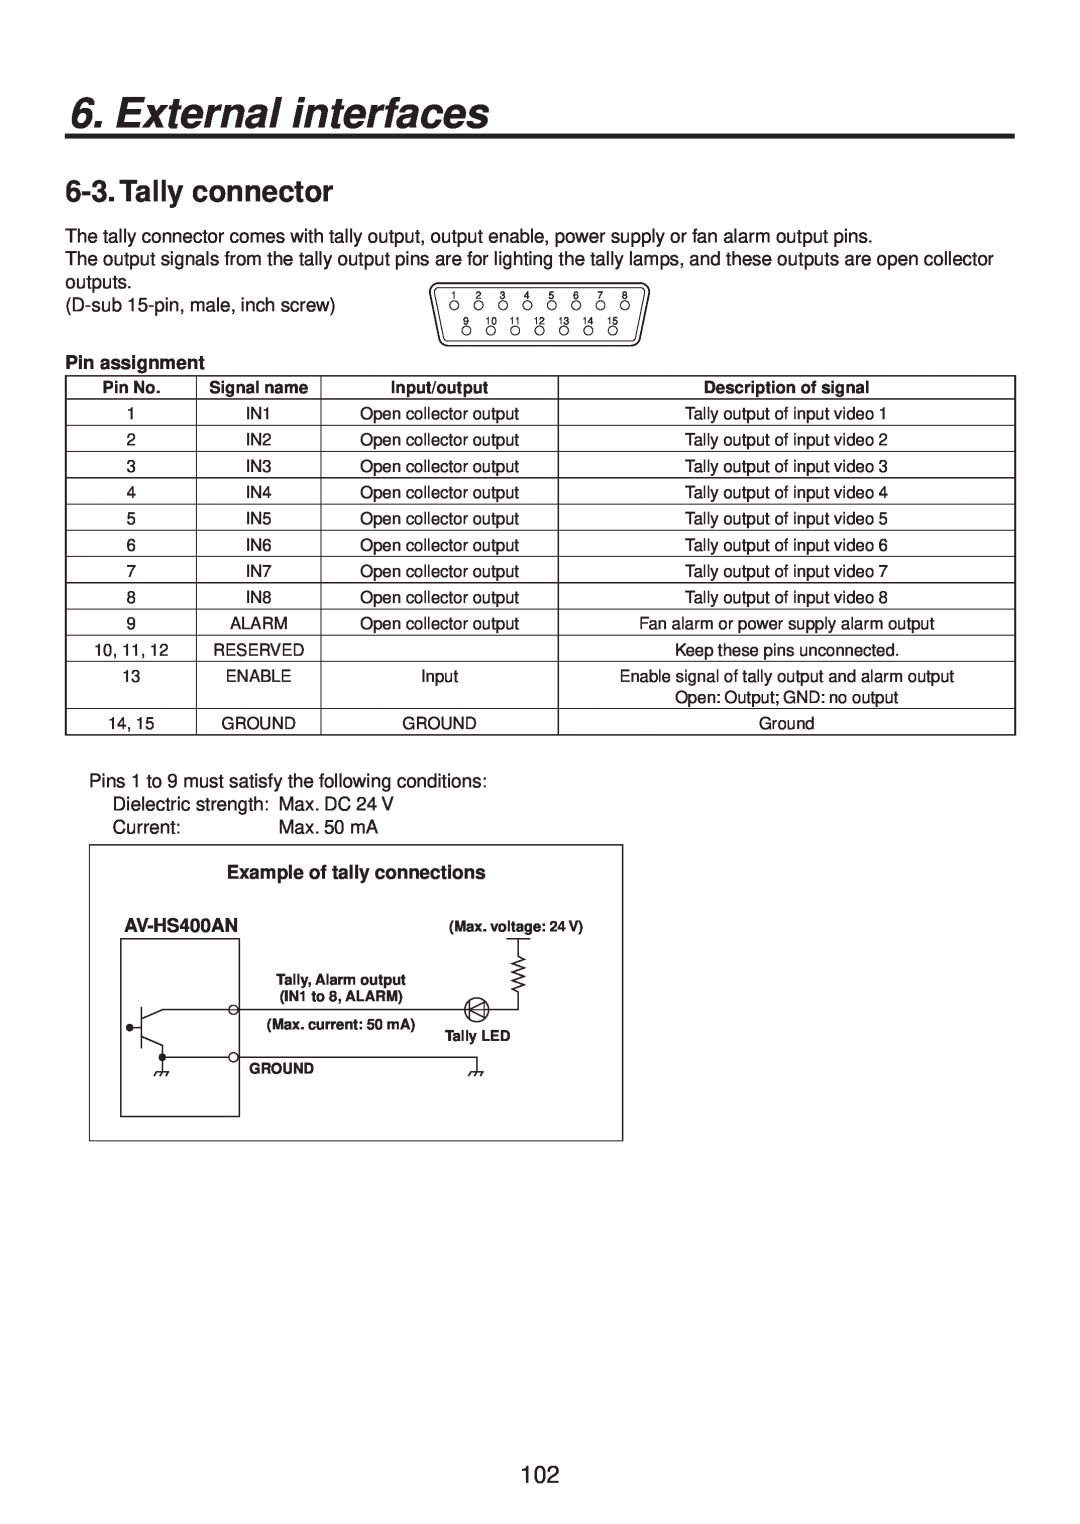 Panasonic AV-HS400AN Pins 1 to 9 must satisfy the following conditions, Dielectric strength Max. DC 24, Current, Tally LED 